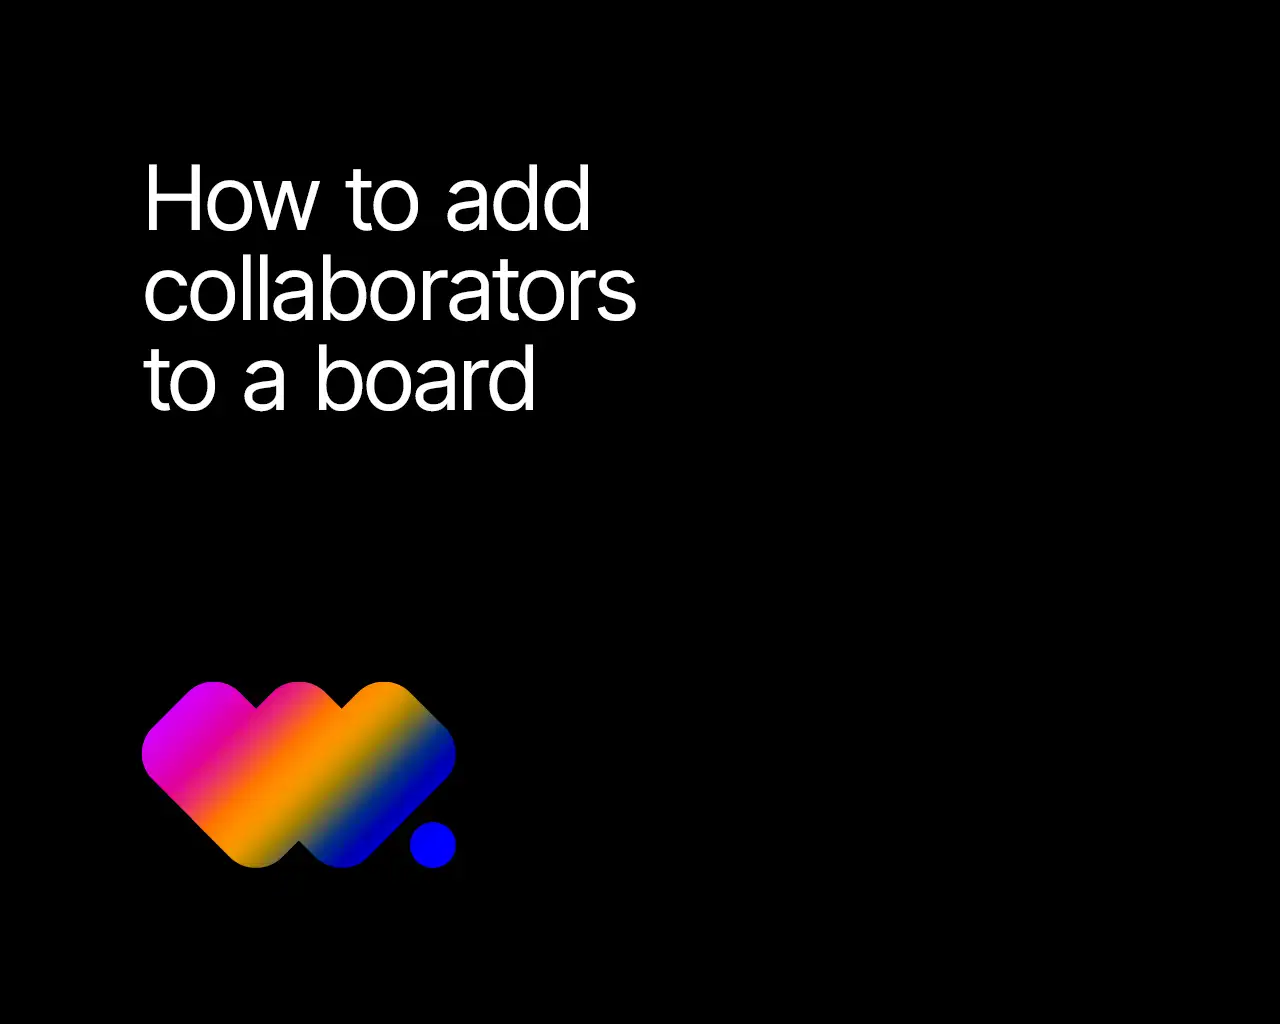 How to add collaborators to a board